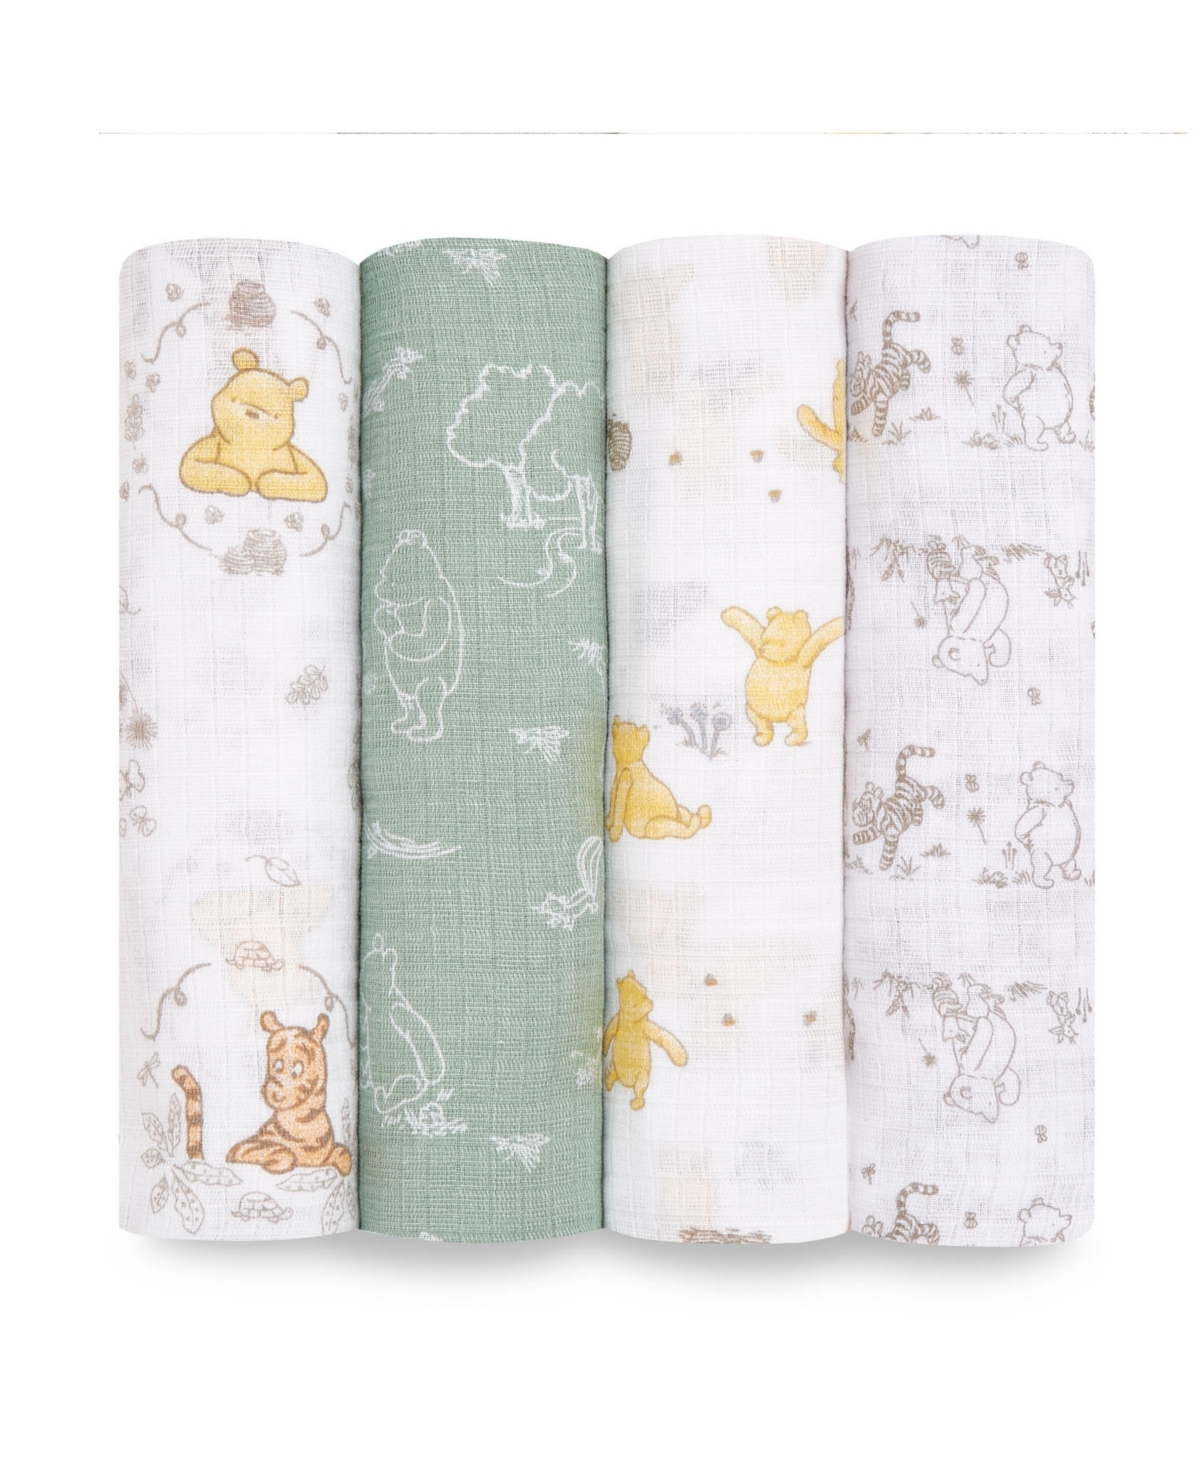 Aden By Aden + Anais Winnie The Pooh And Friends Swaddle Blankets, Pack Of 4 In Multi